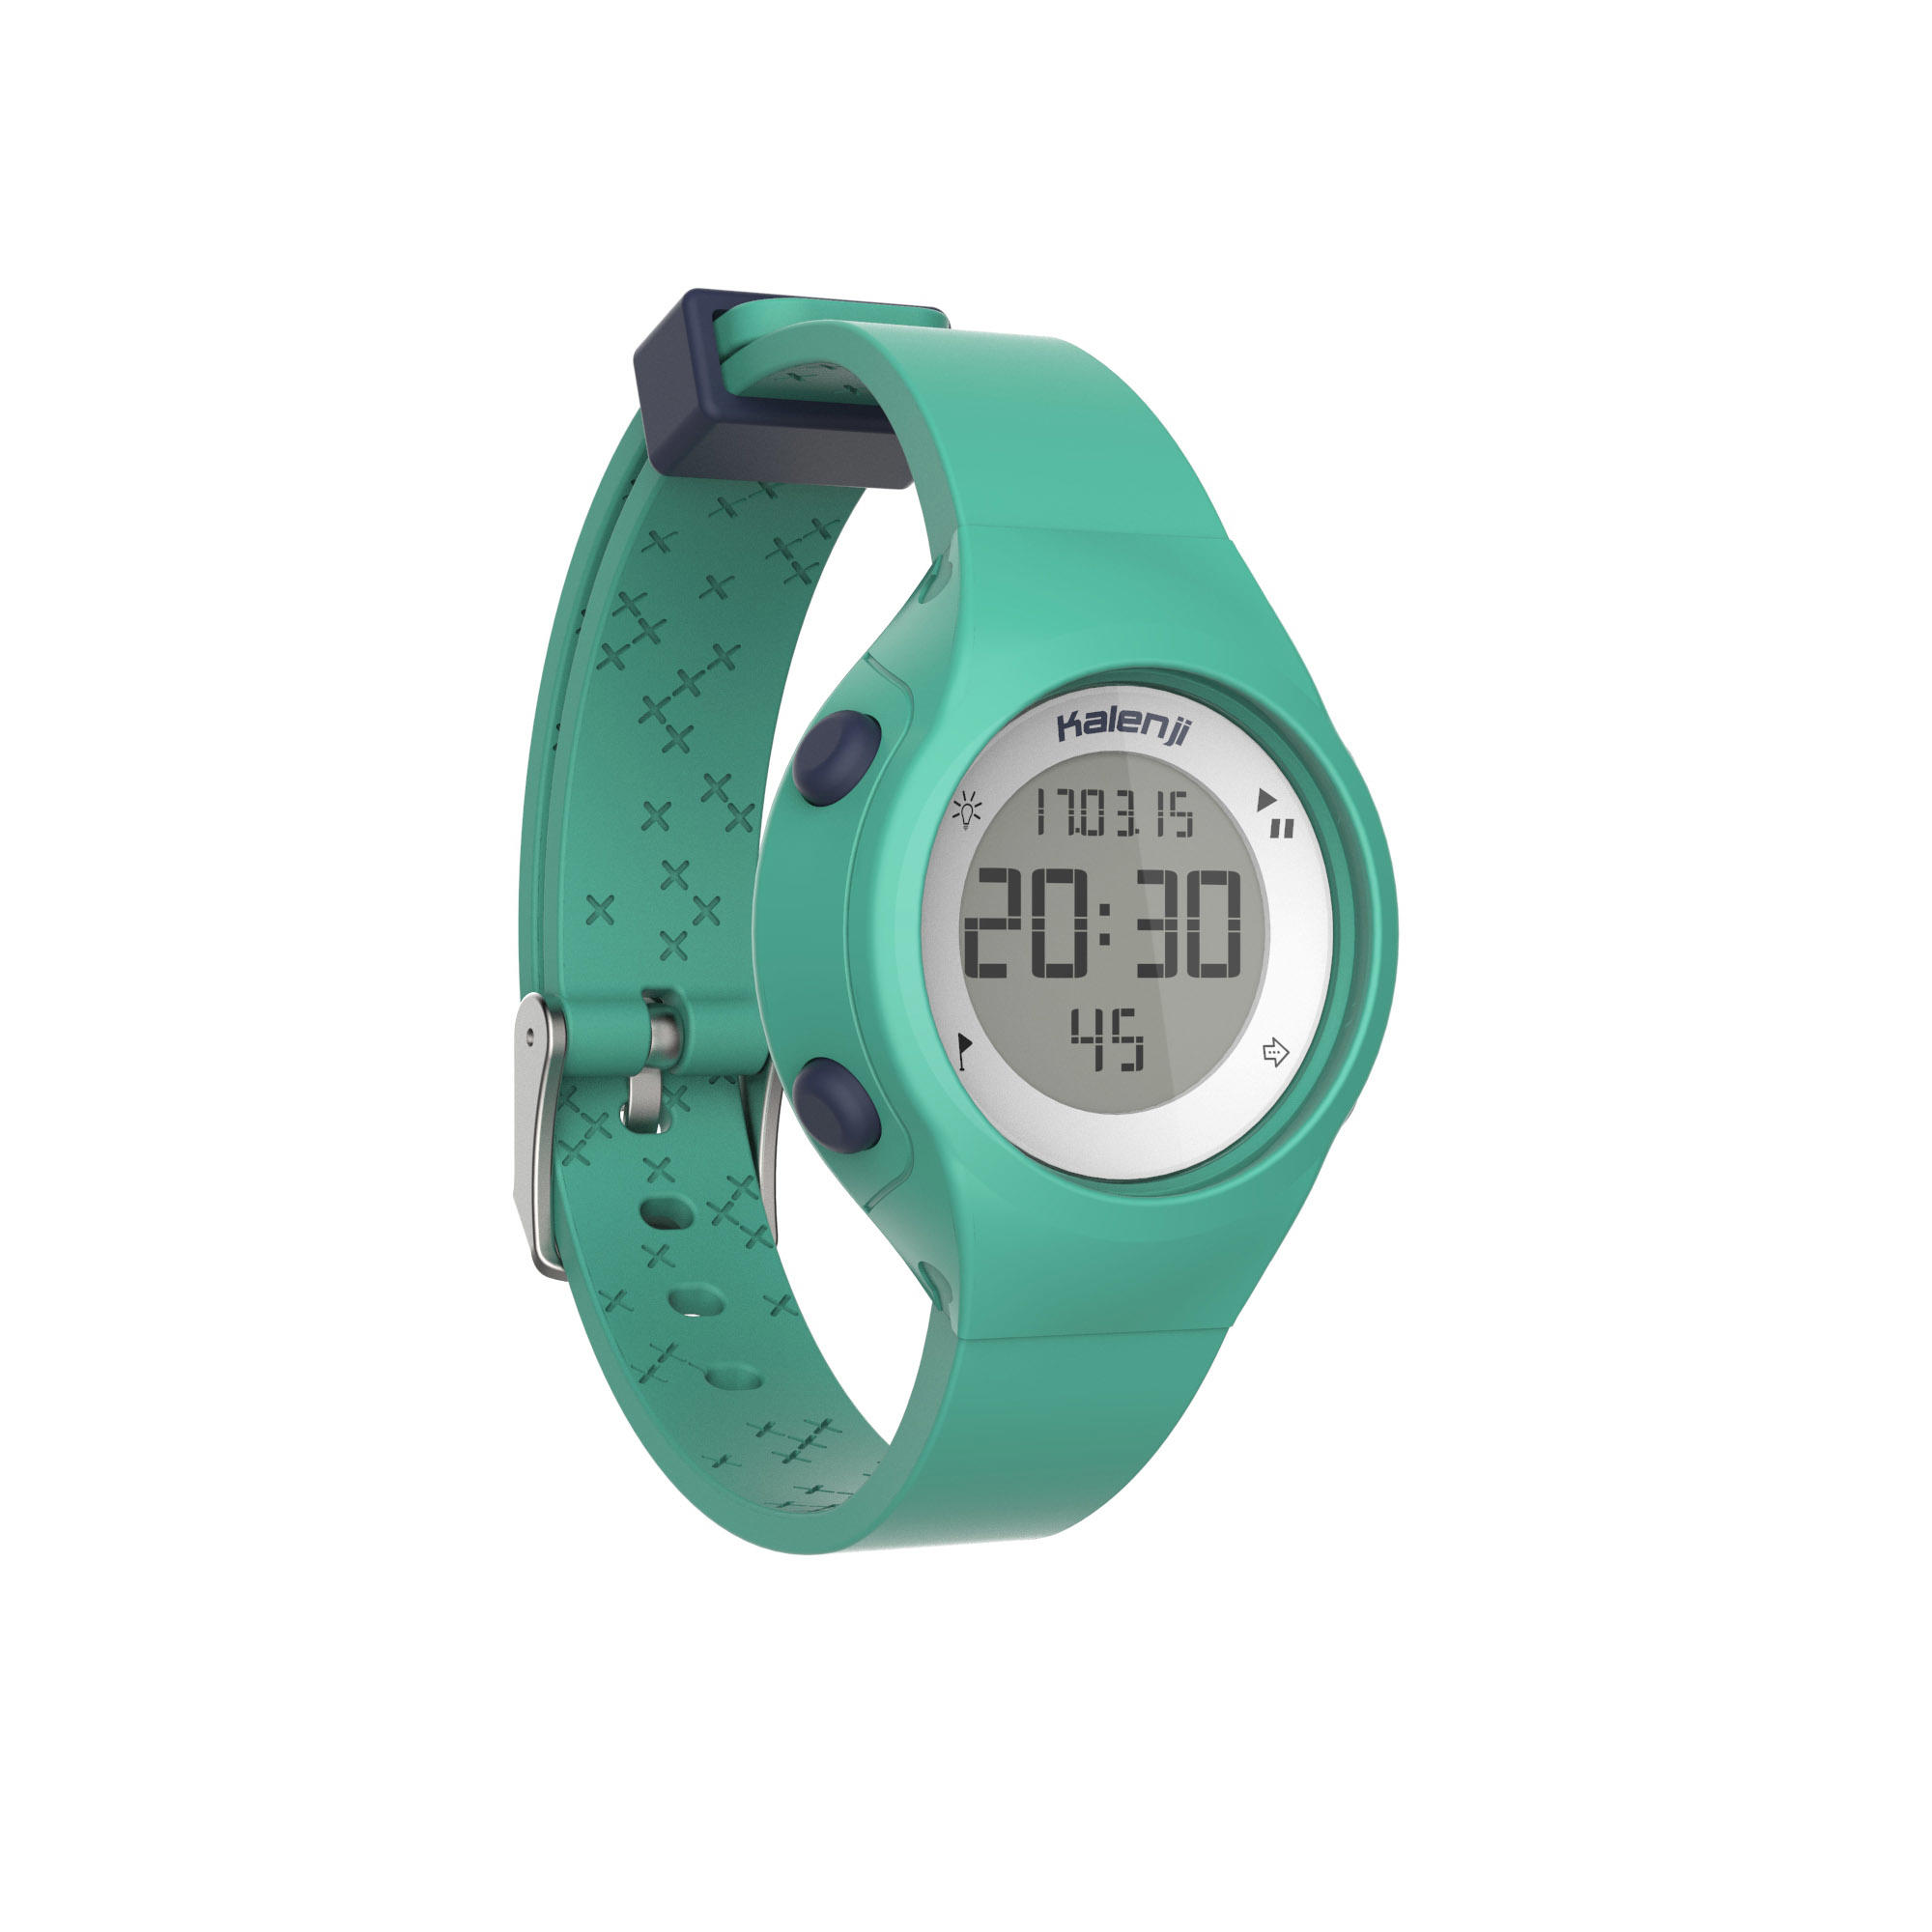 Kids' Sports Watches | From £10 | Decathlon